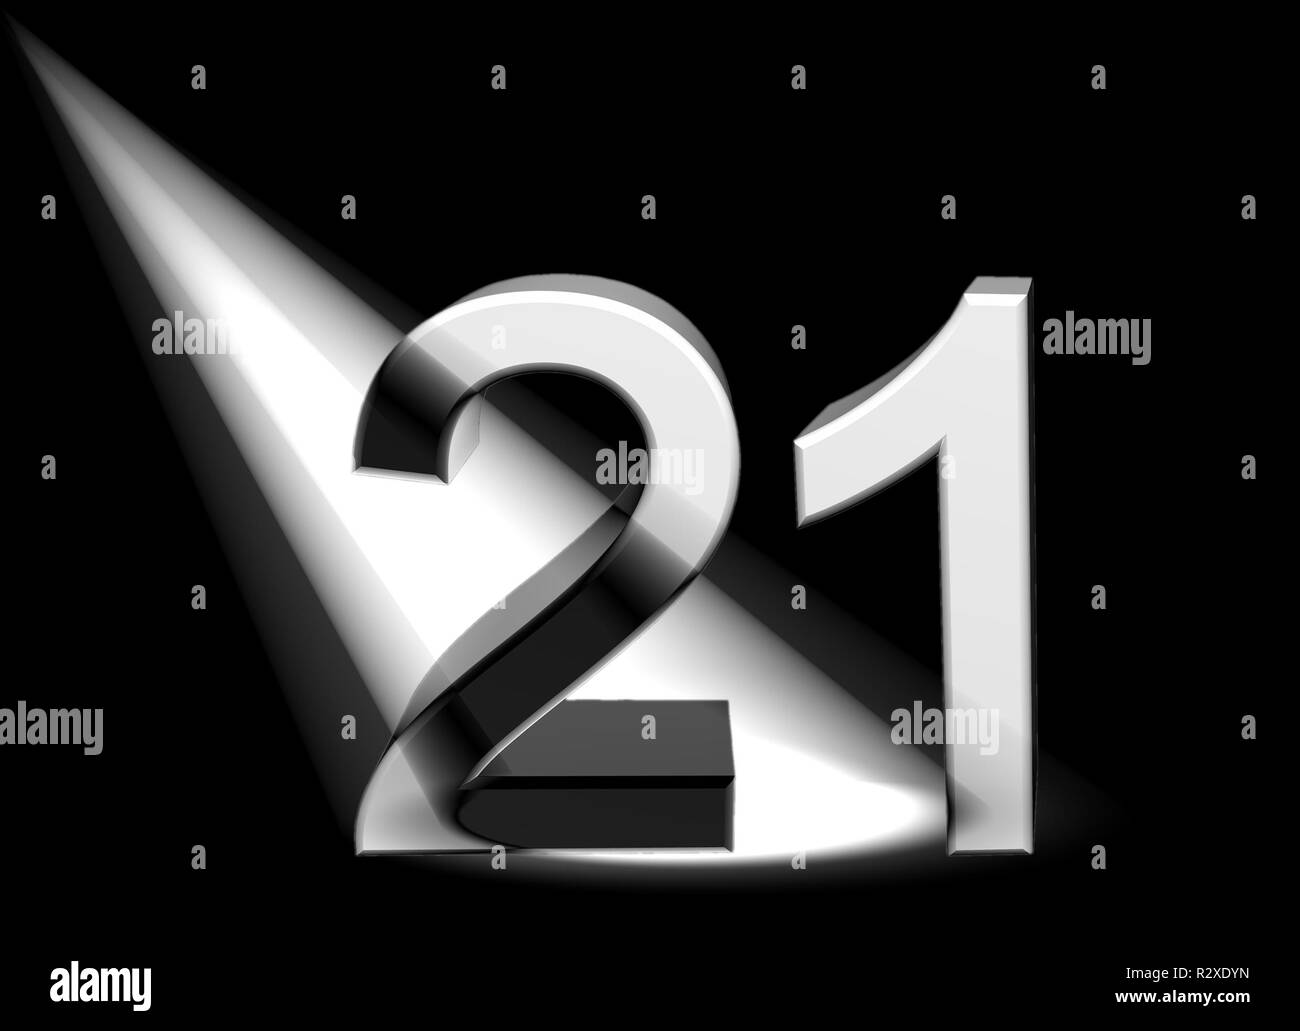 21 21 meaning